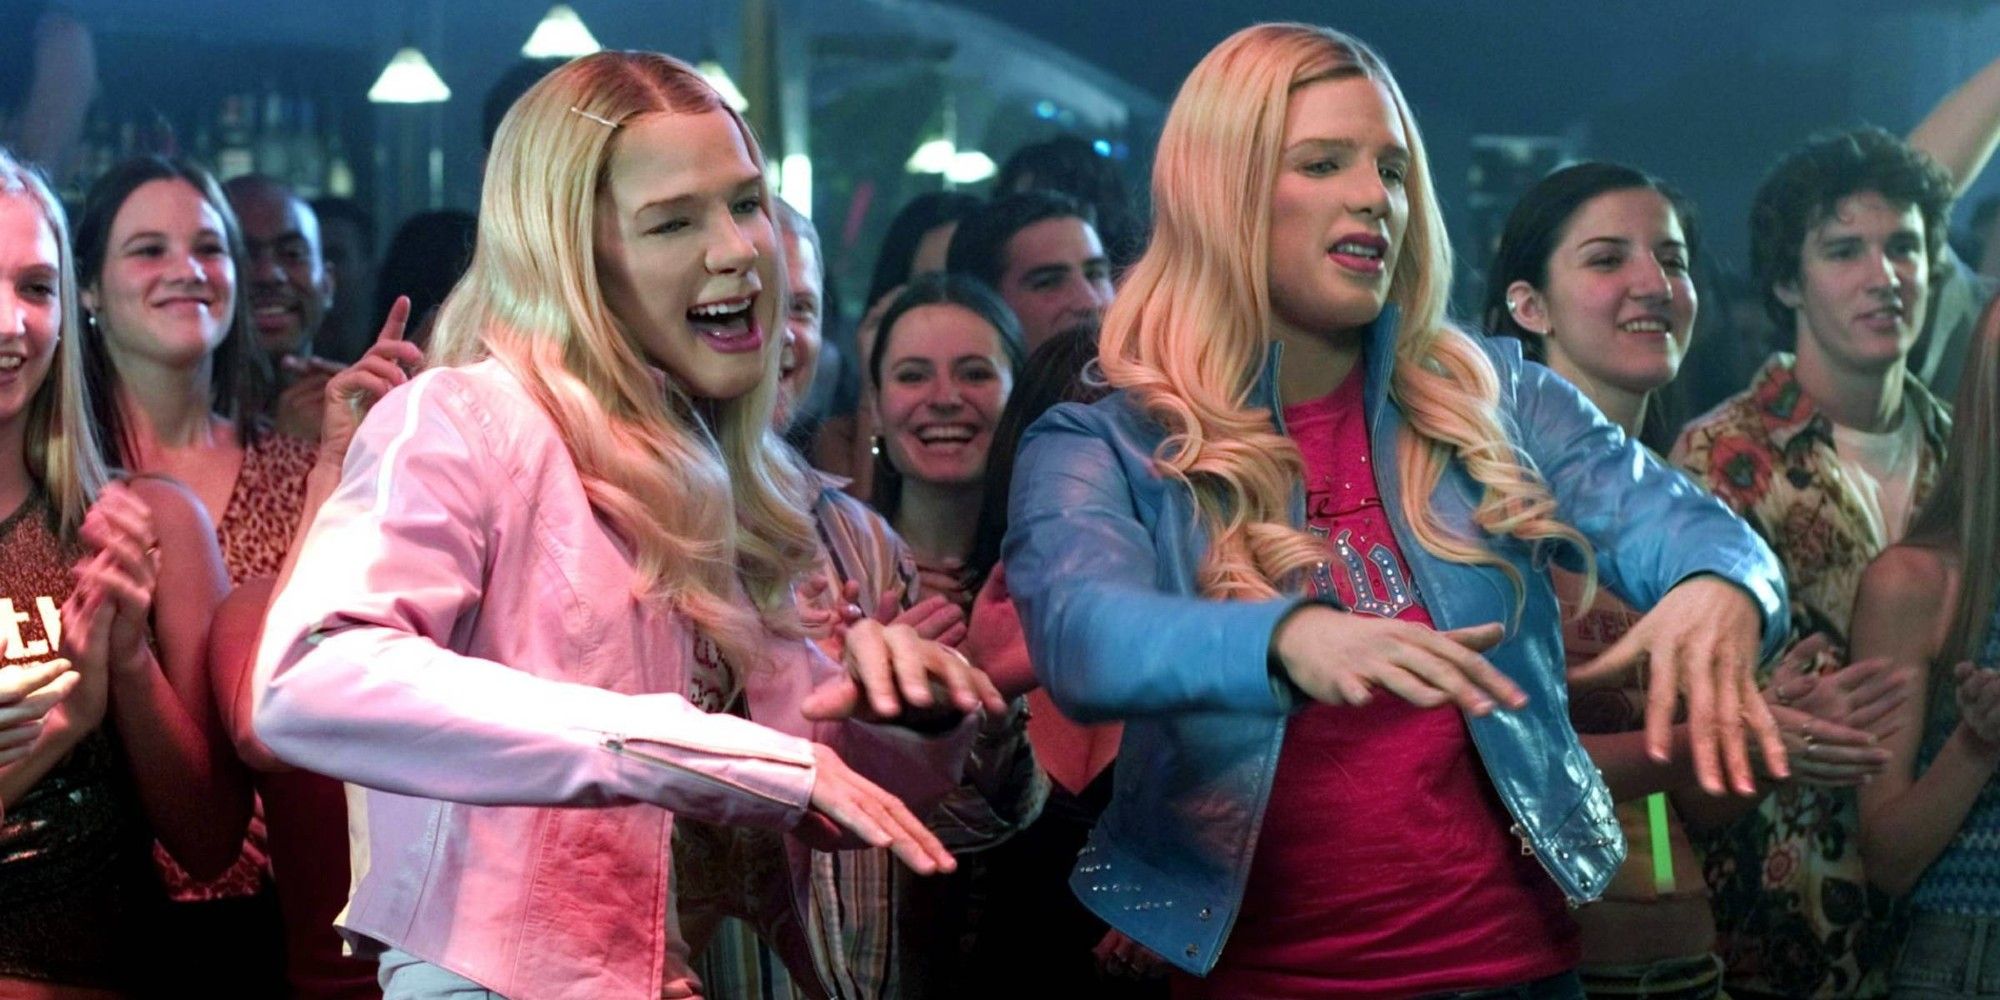 Kevin and Marcus dressed as Brittany and Tiffany in White Chicks